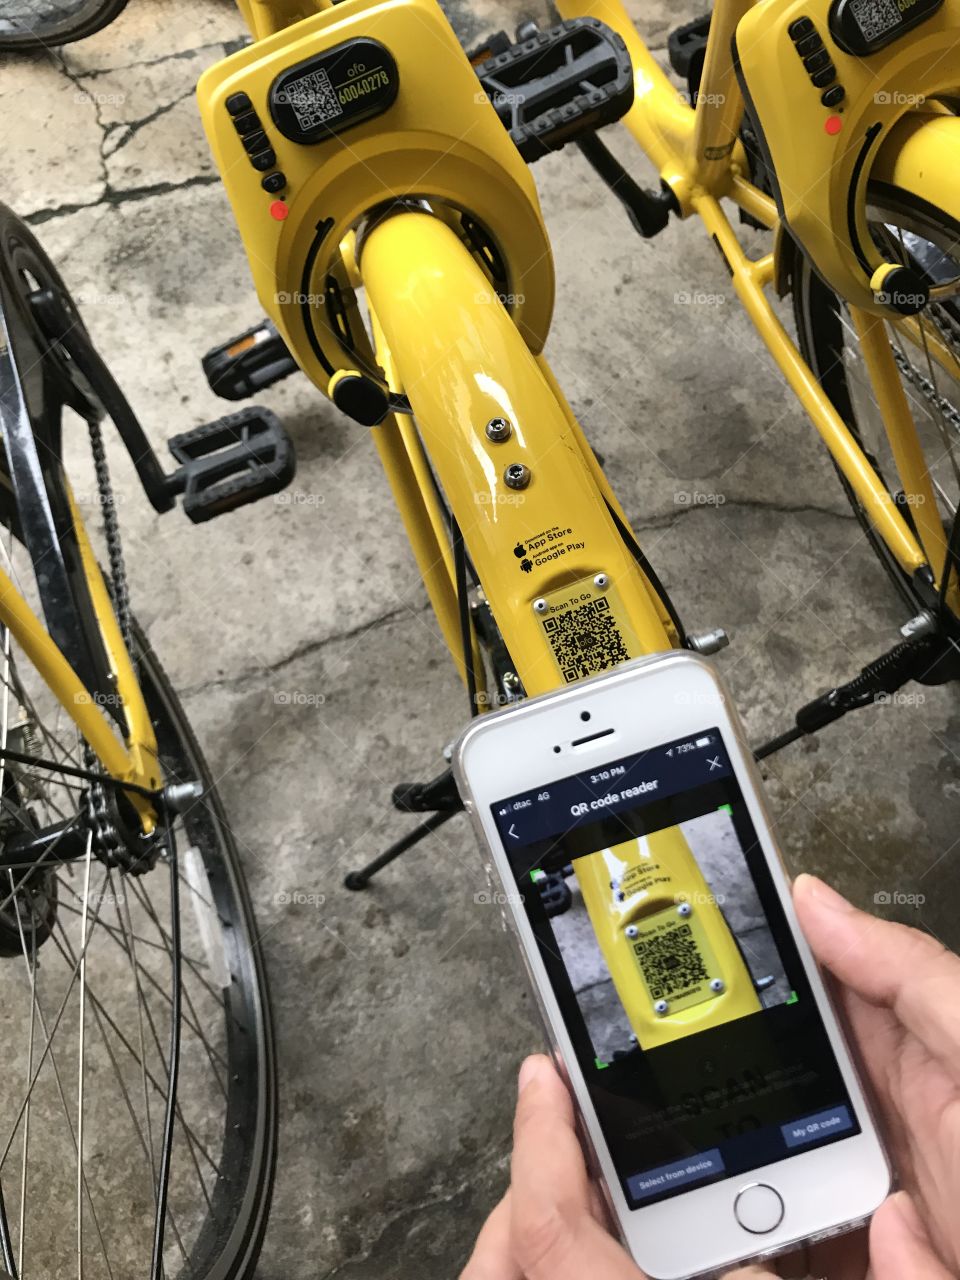 user is scanning QR code of OFO brand bicycle for renting it